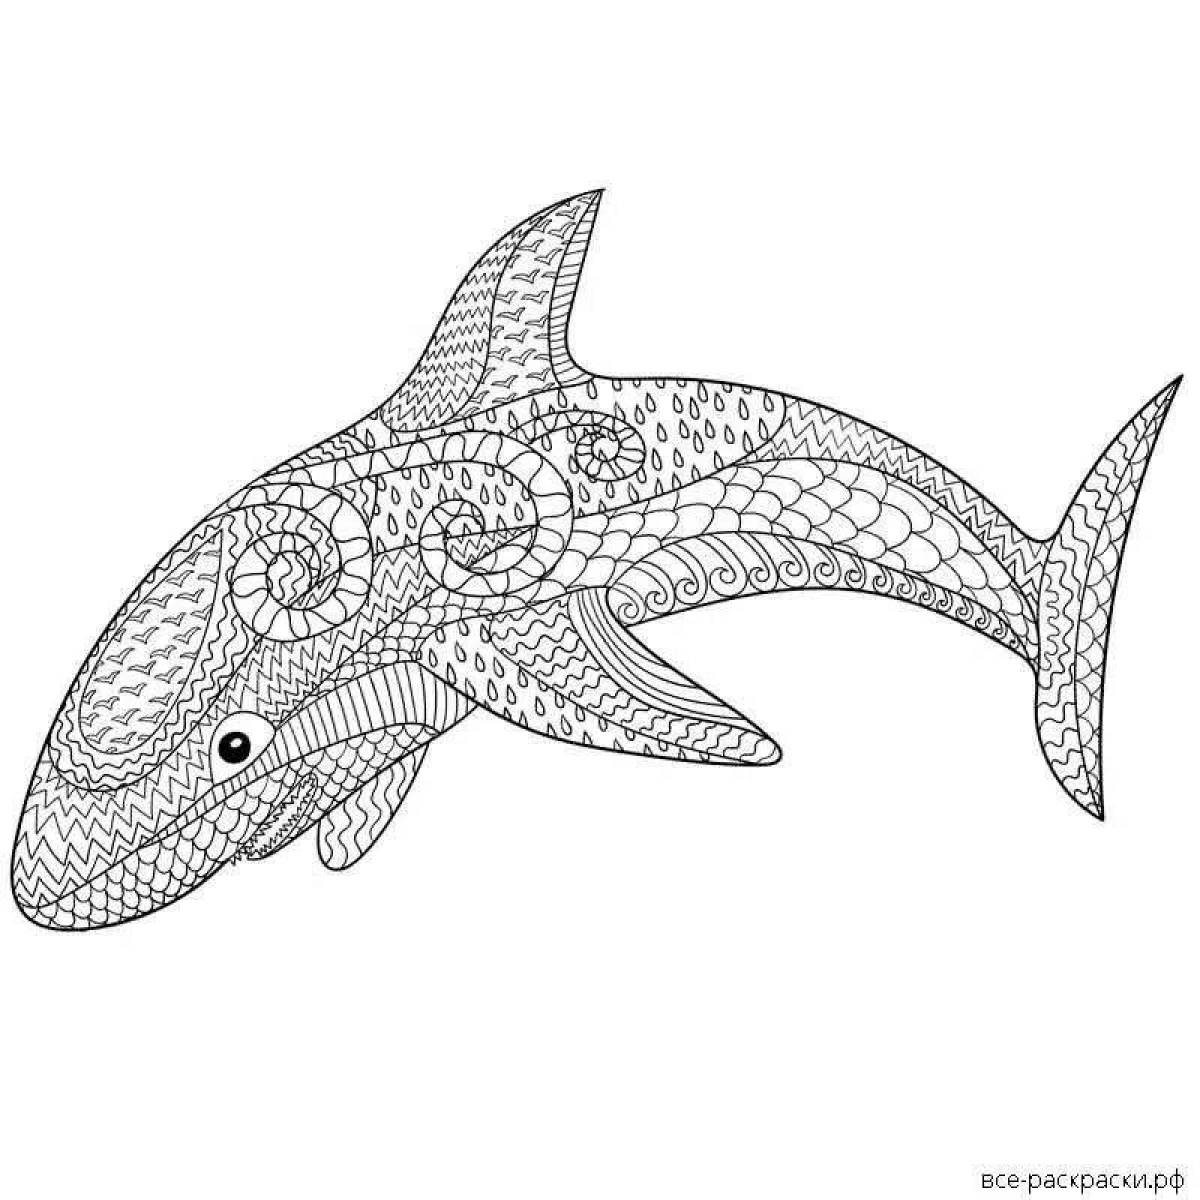 Colorful coloring shark from ikea